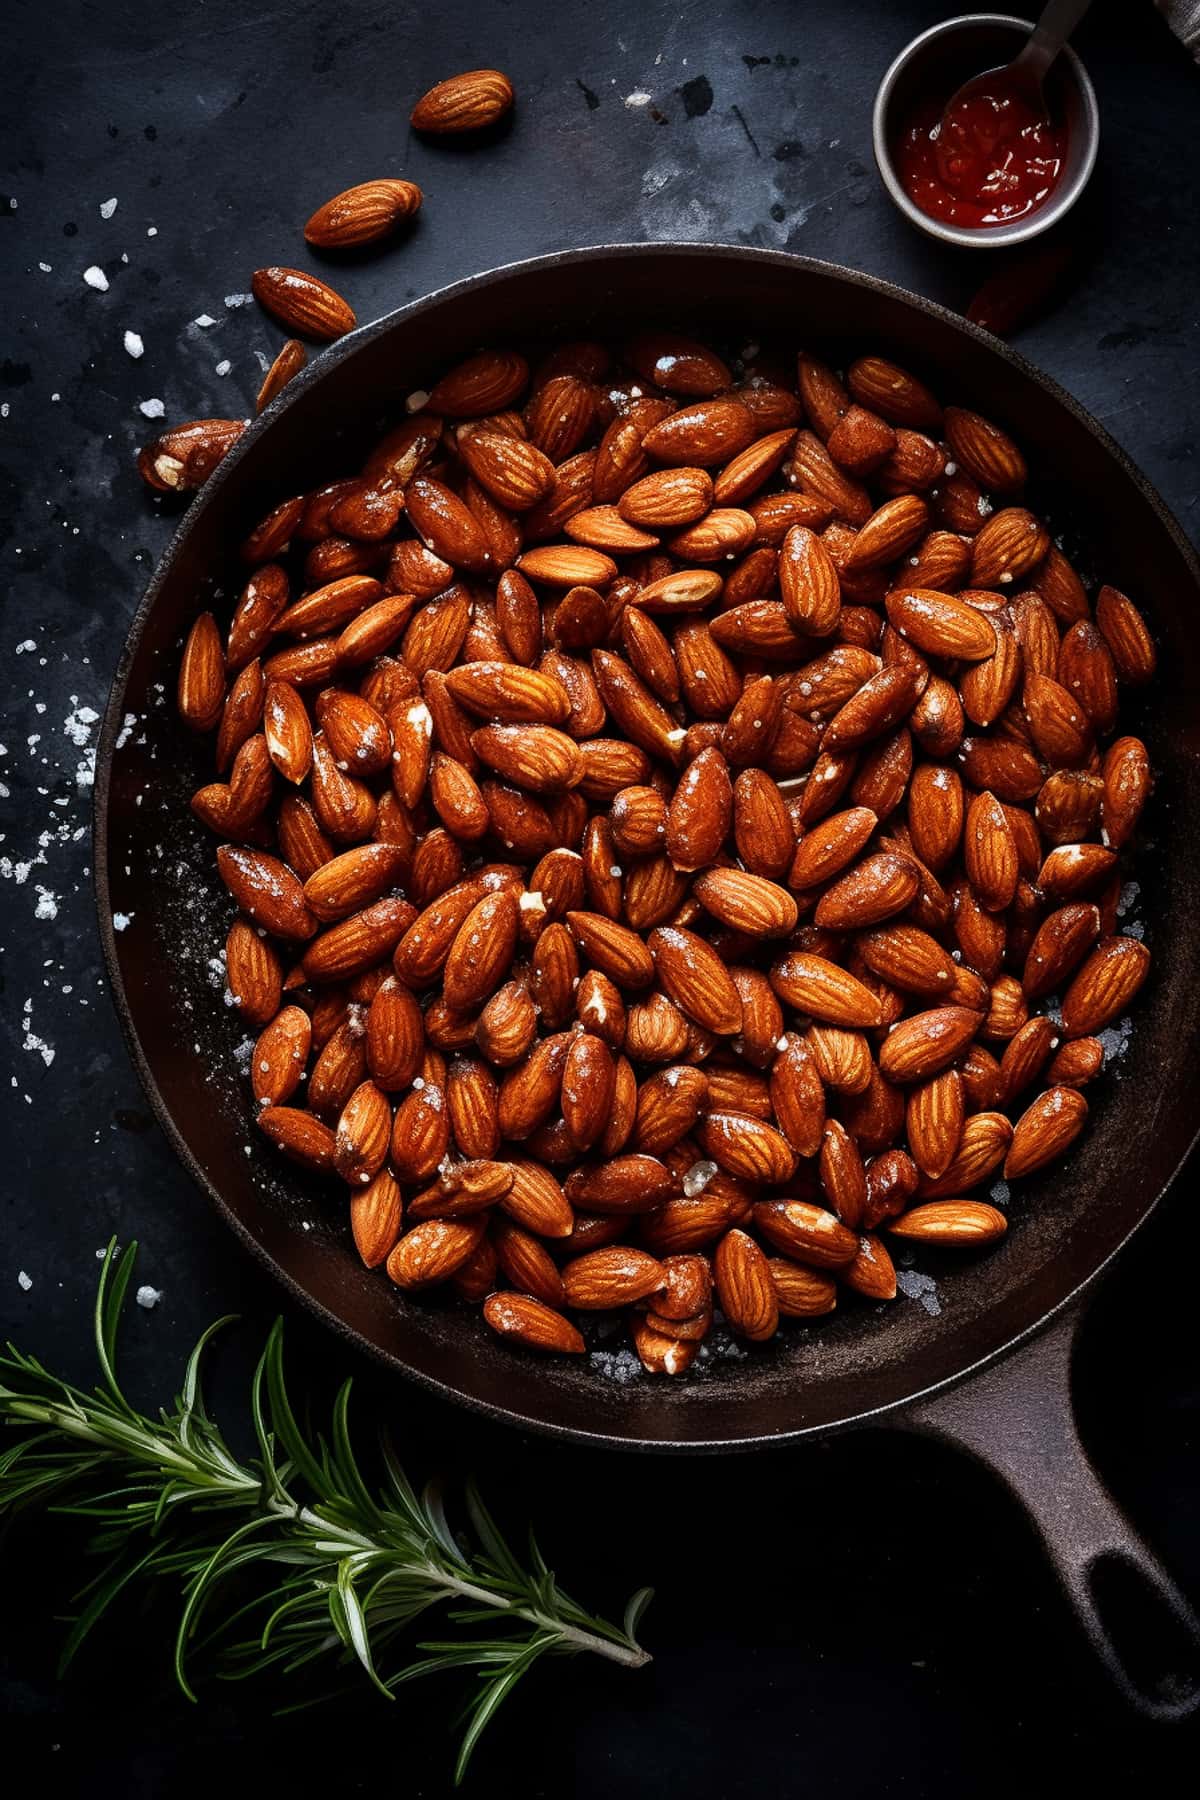 Toasted almonds for peach salad.